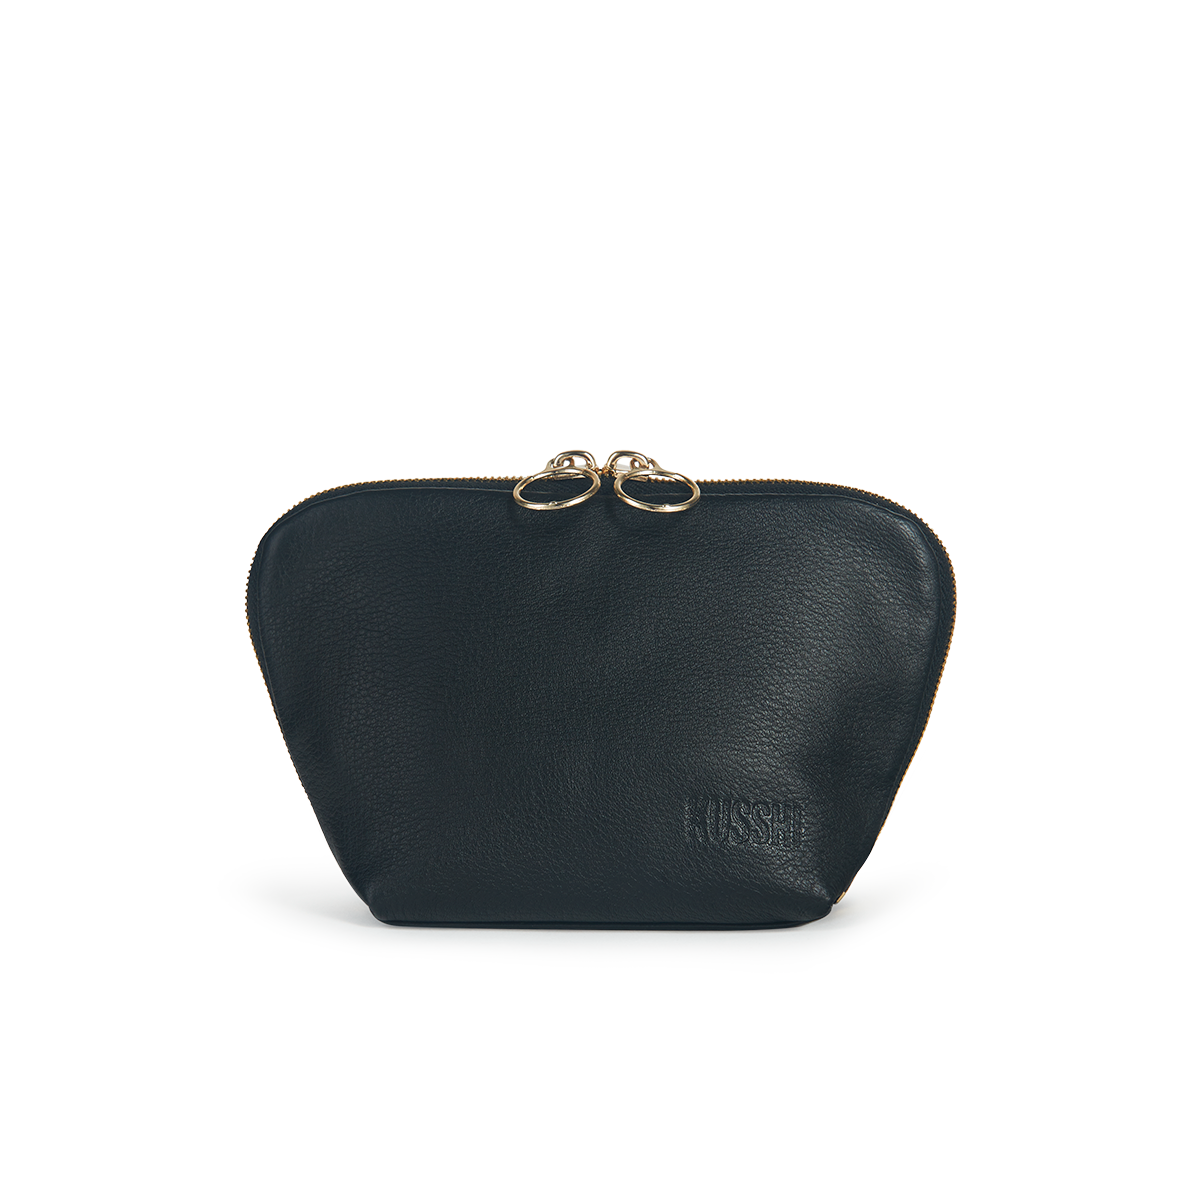 color: Luxurious Black Leather with Cool Grey Interior; alt: Everyday Small Size Makeup Bag | KUSSHI